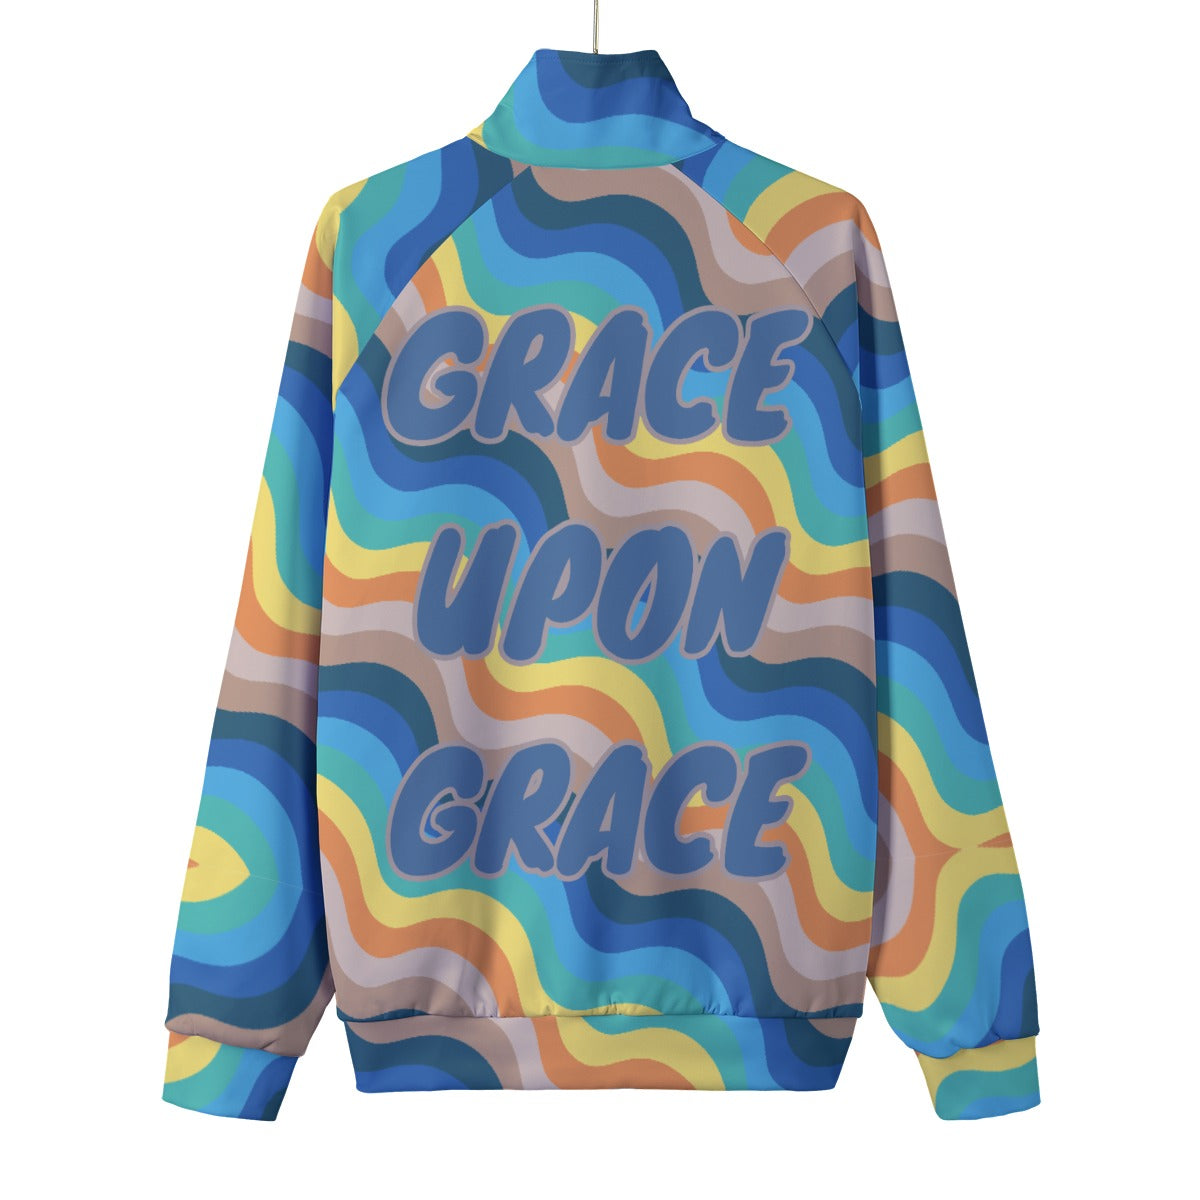 Grace upon grace Stand Collar White Lining Jacket